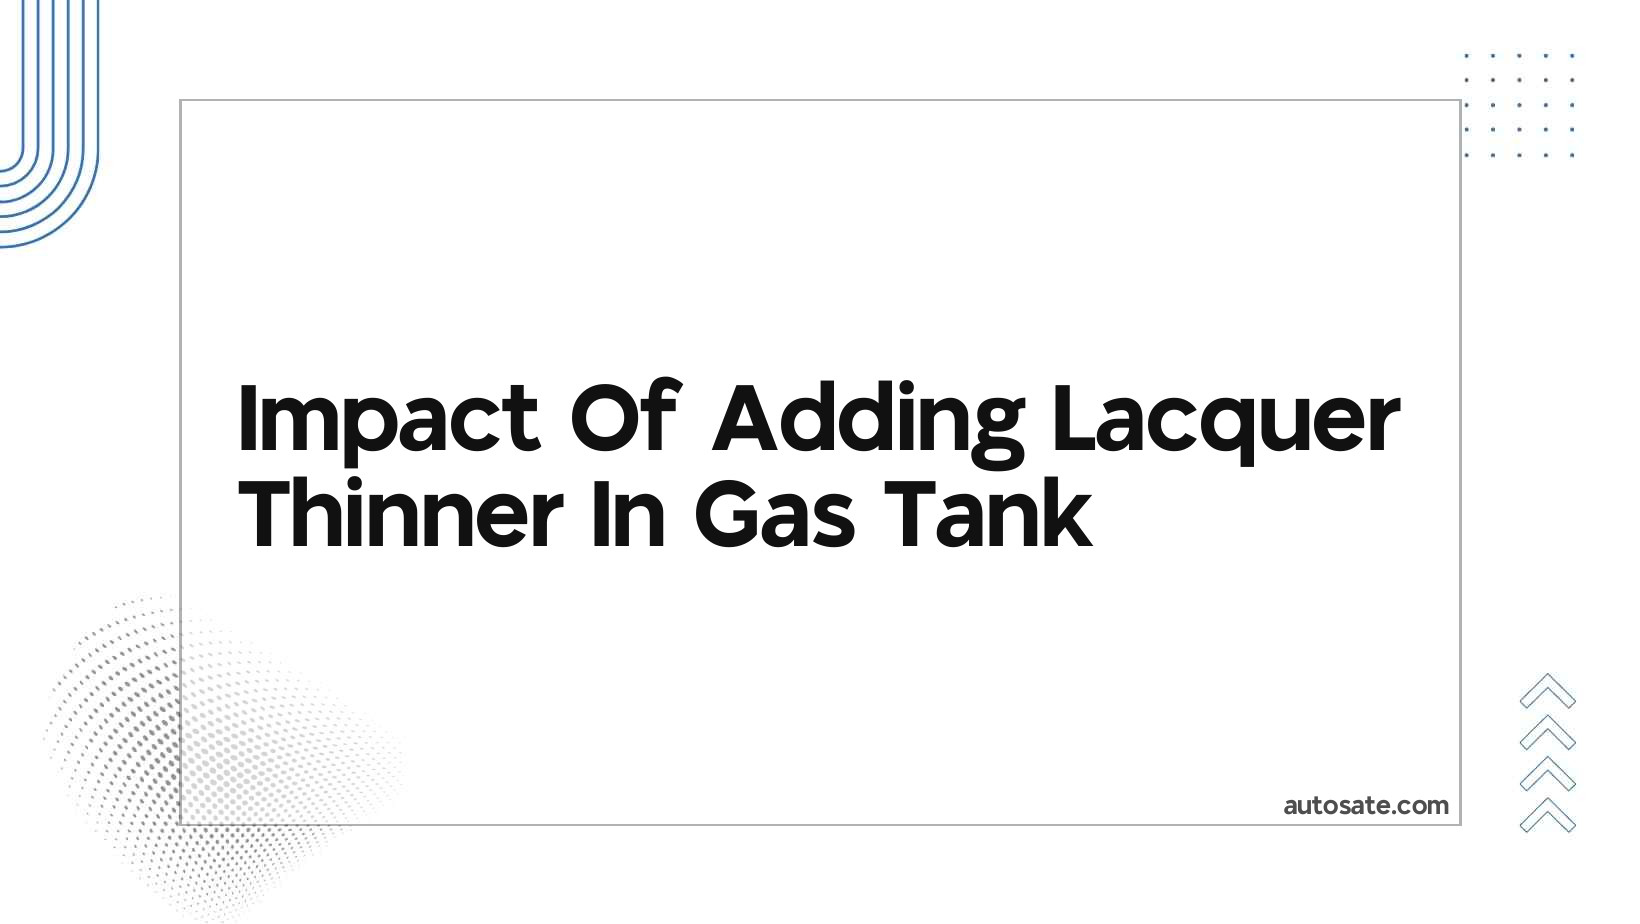 Impact Of Adding Lacquer Thinner In Gas Tank